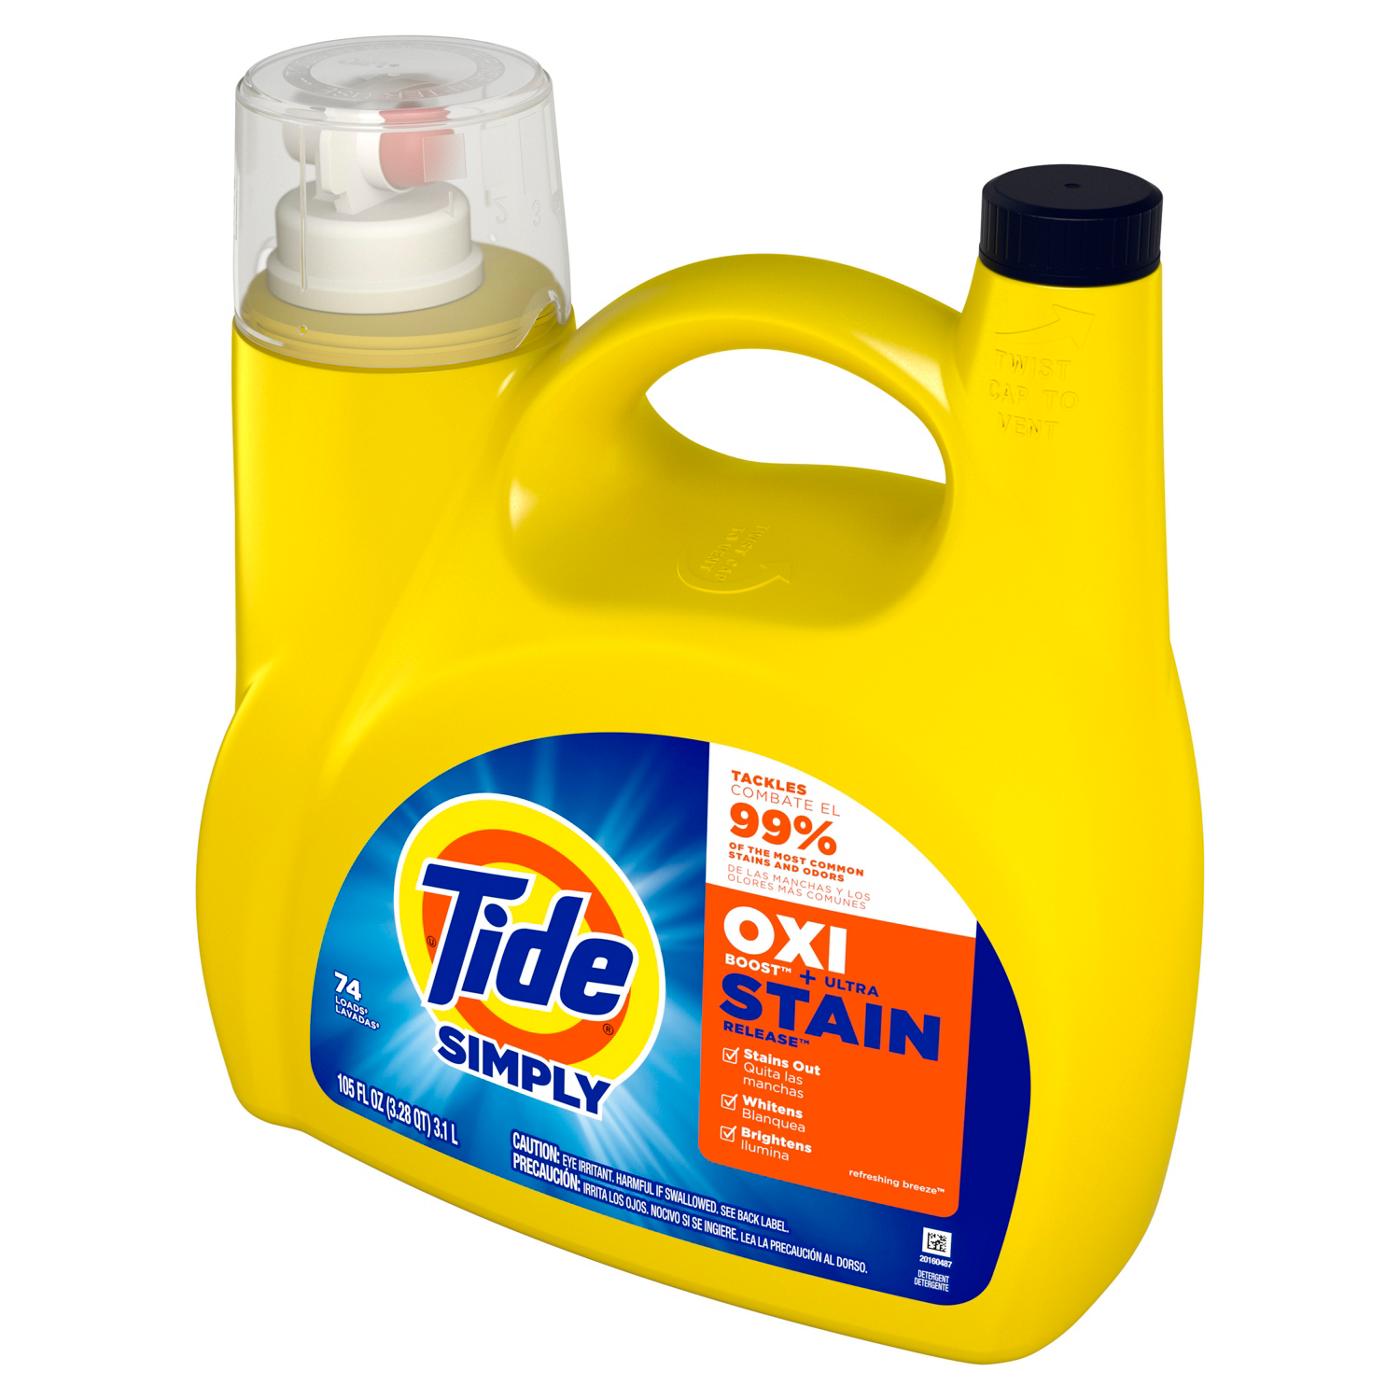 Tide + Simply Oxi HE Liquid Laundry Detergent, 74 Loads - Refreshing Breeze; image 14 of 17